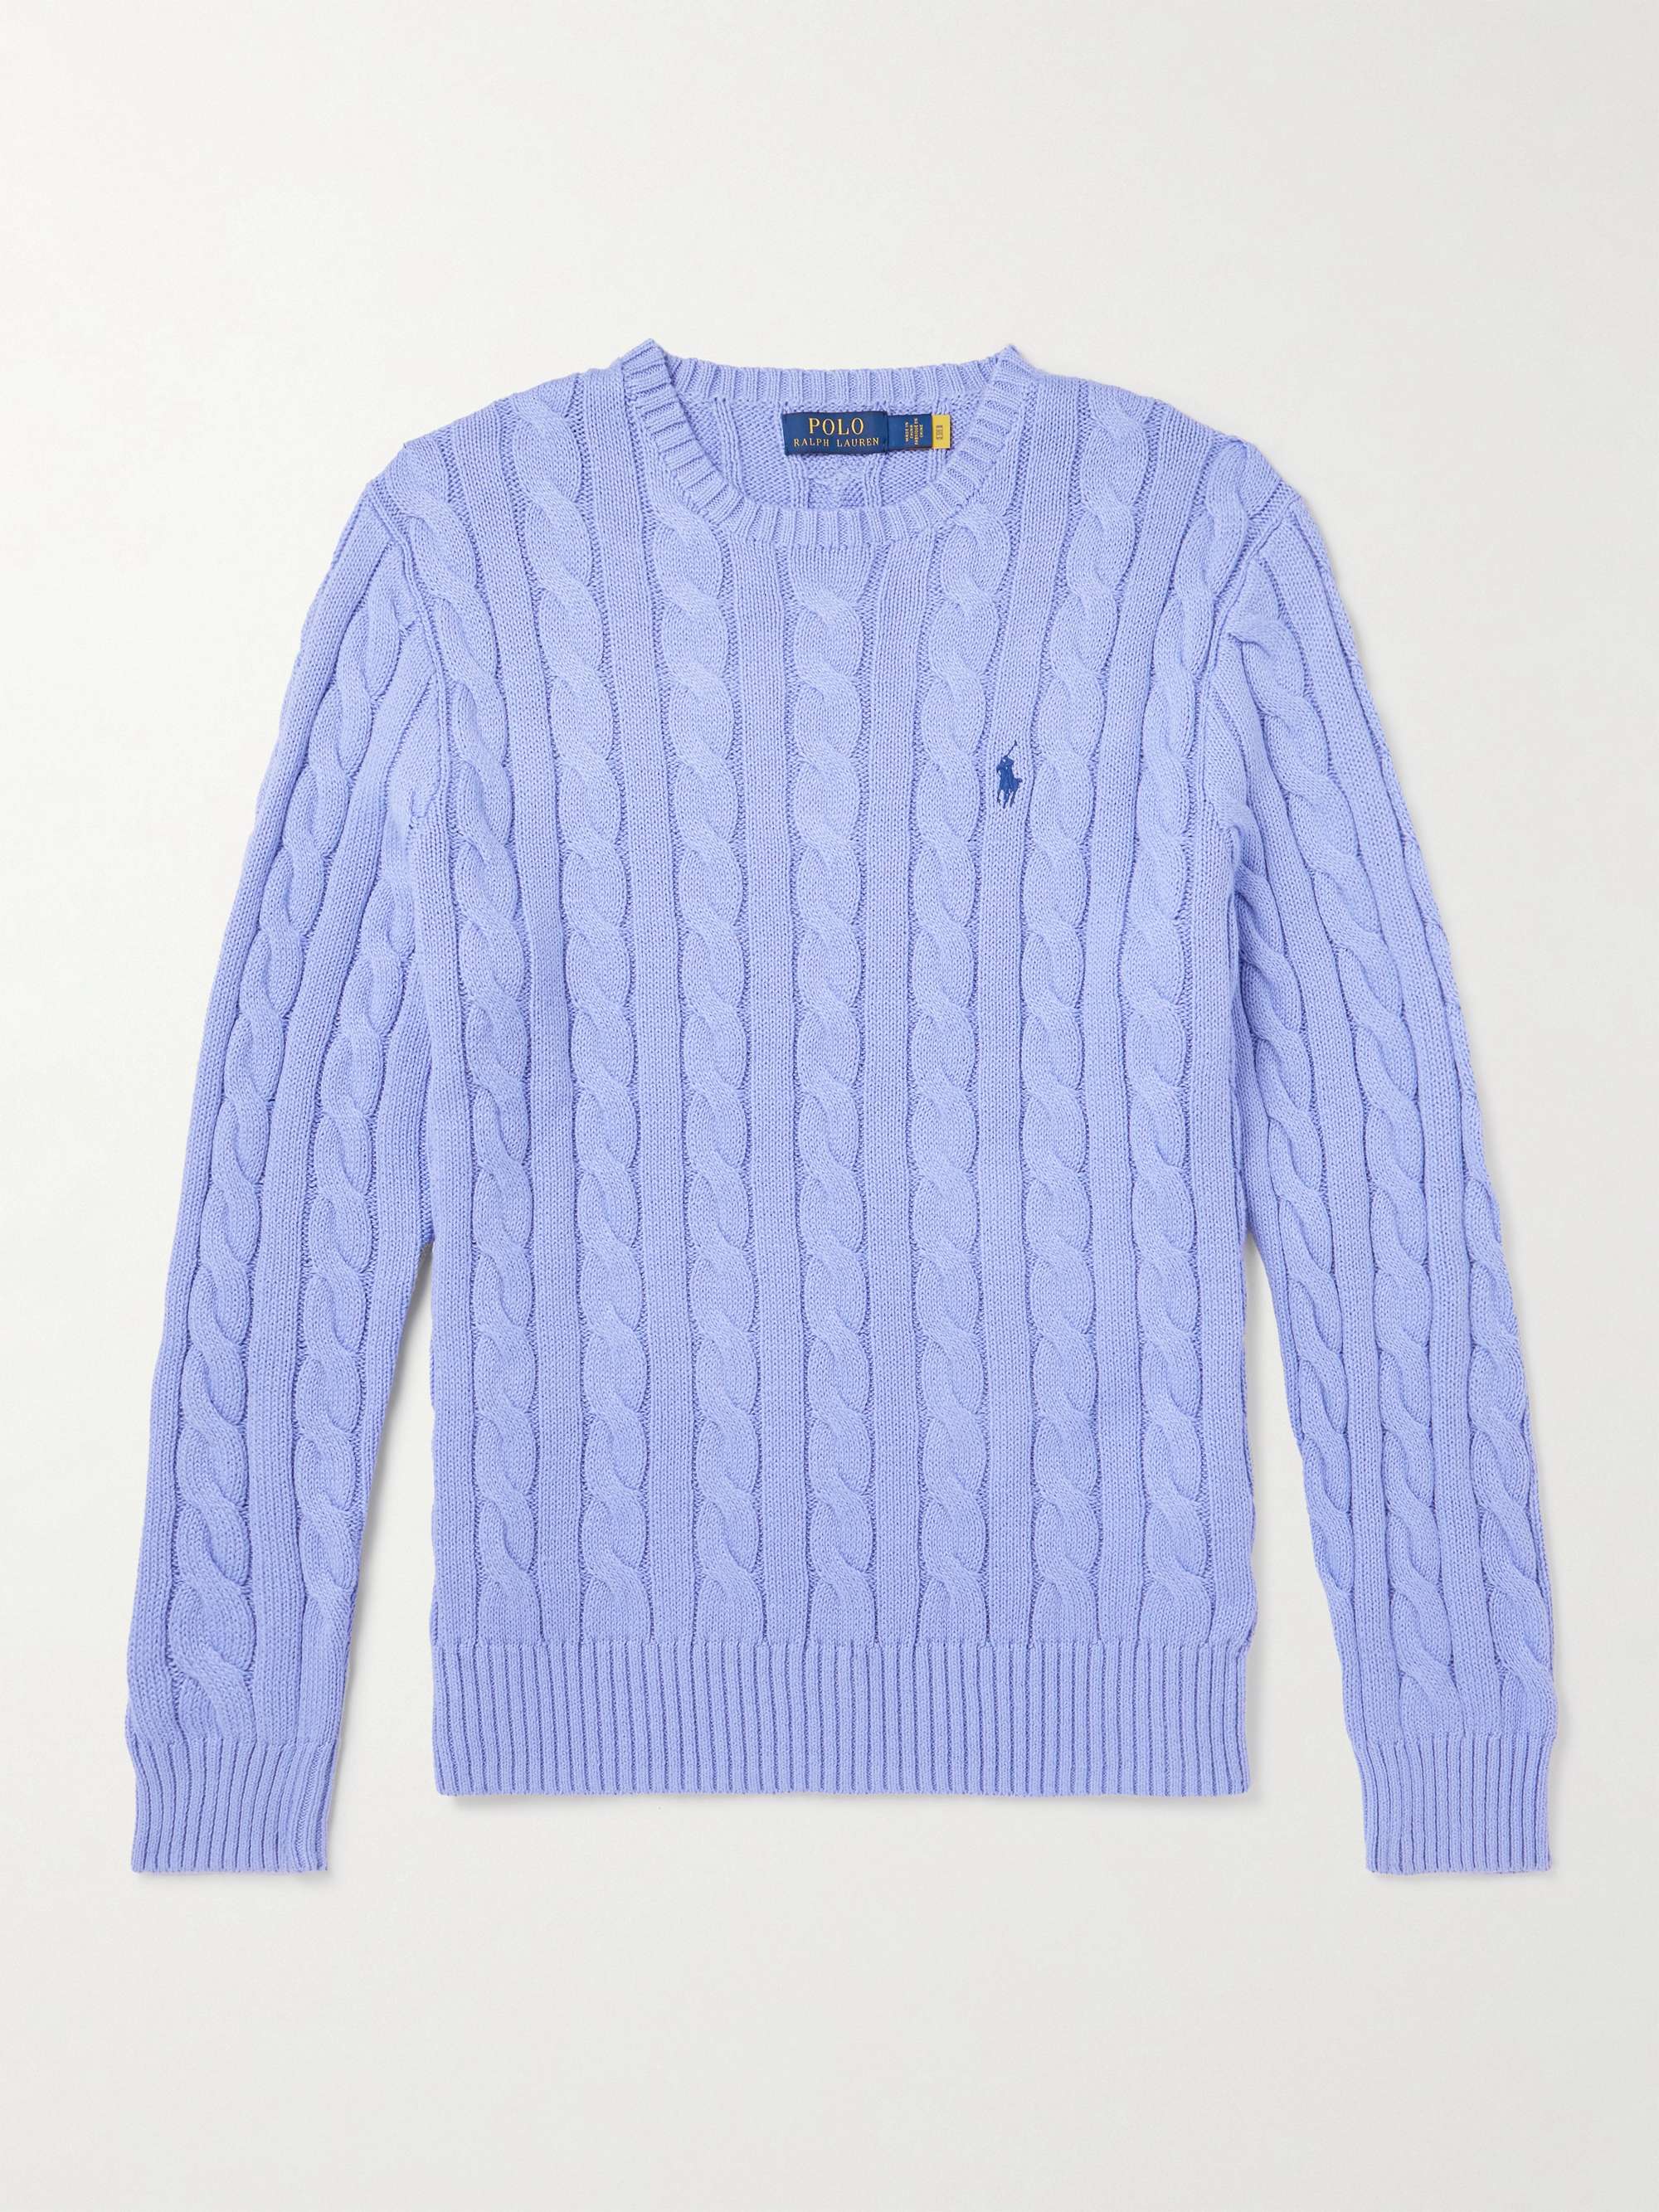 POLO RALPH LAUREN Logo-Embroidered Cable-Knit Cotton Sweater | MR PORTER